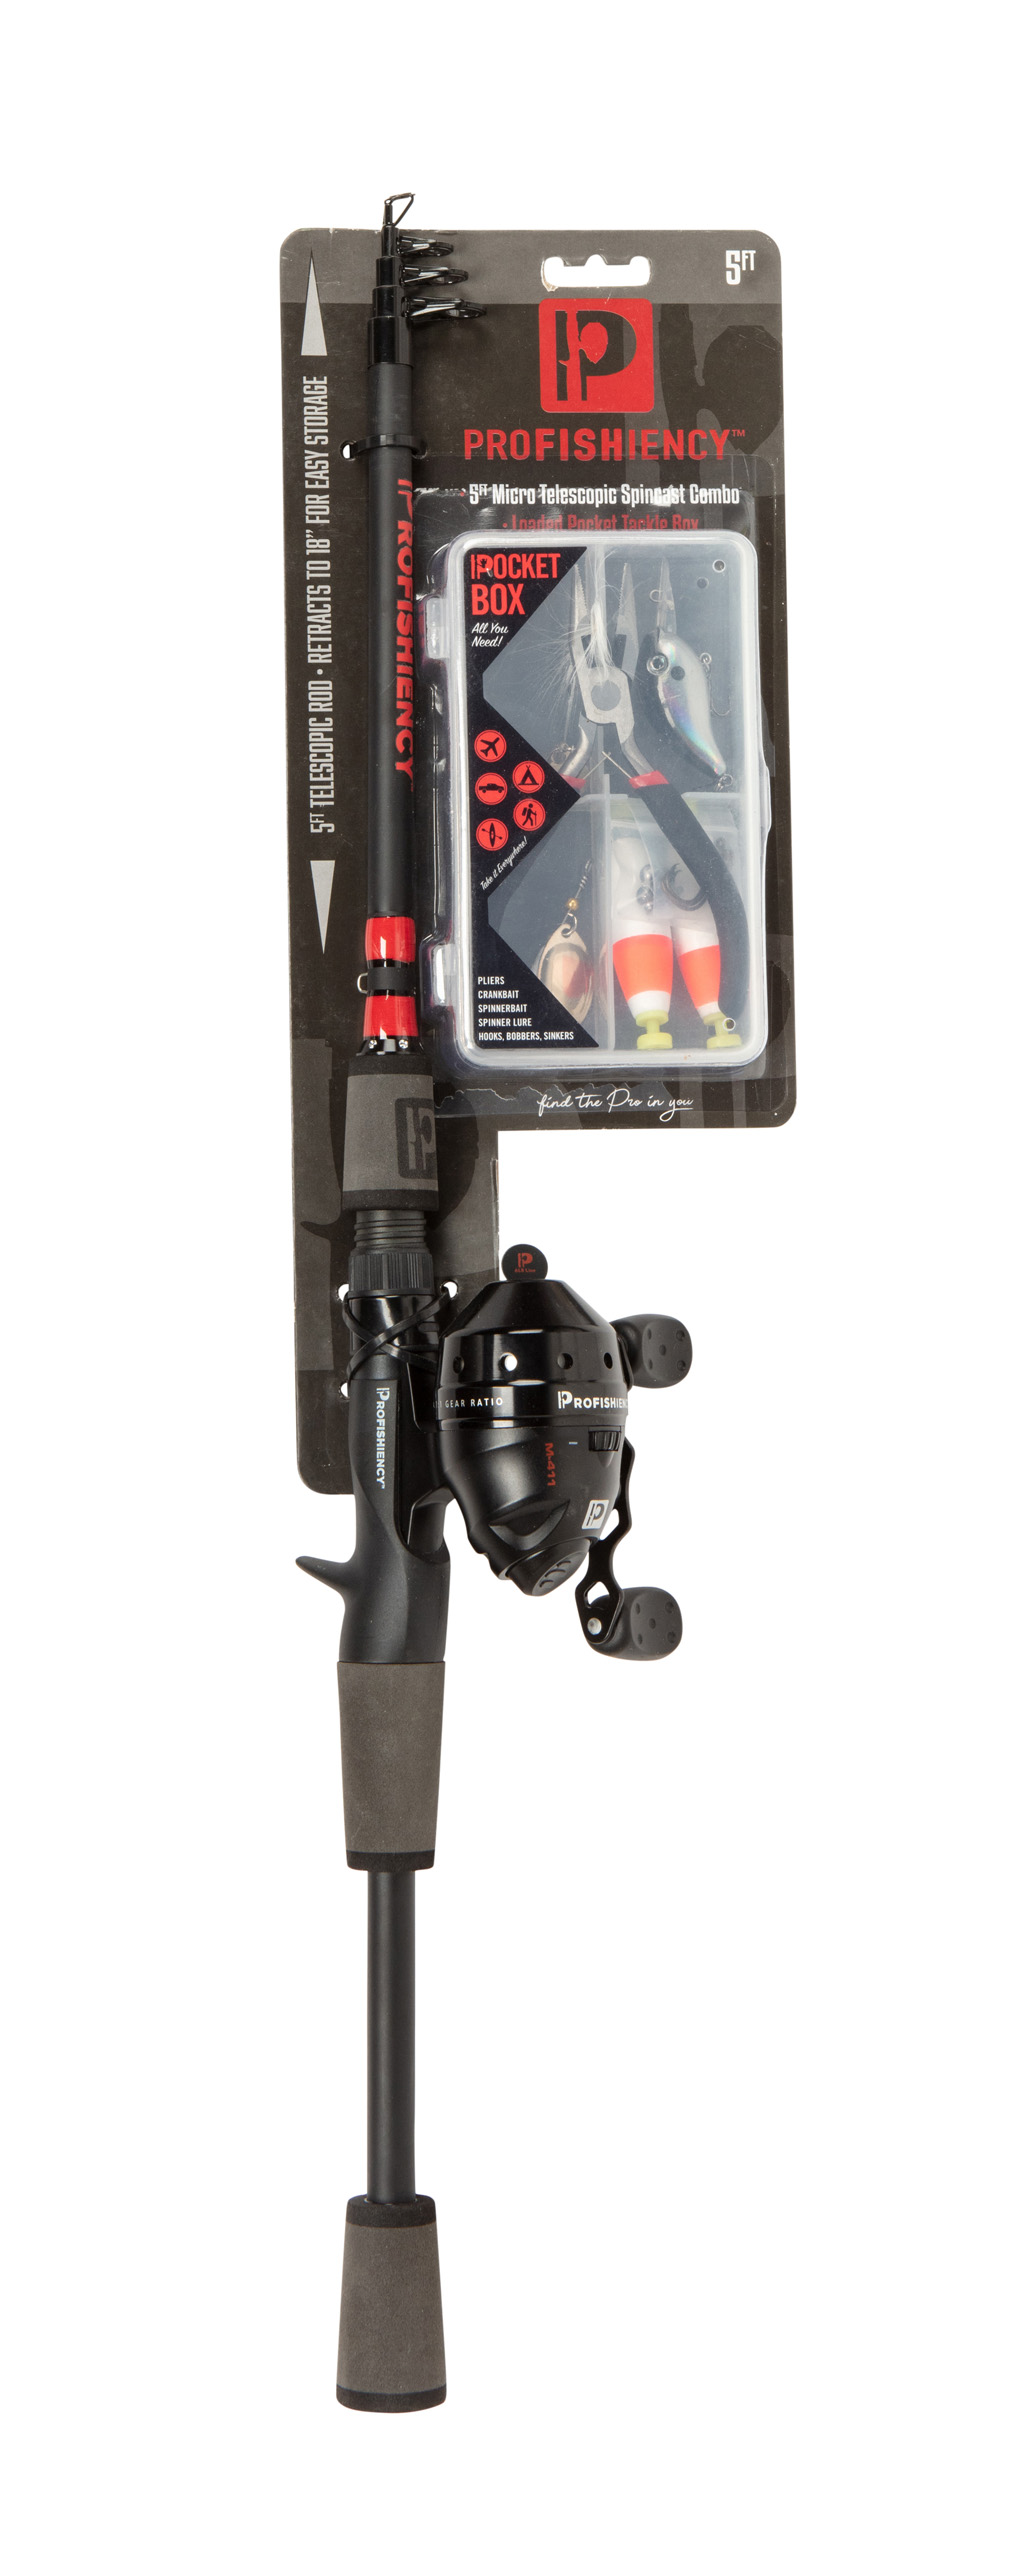 https://op2.0ps.us/original/opplanet-profishiency-5-micro-telescopic-spincast-combo-with-pocket-tackle-box-multicolor-pro5sctele-main